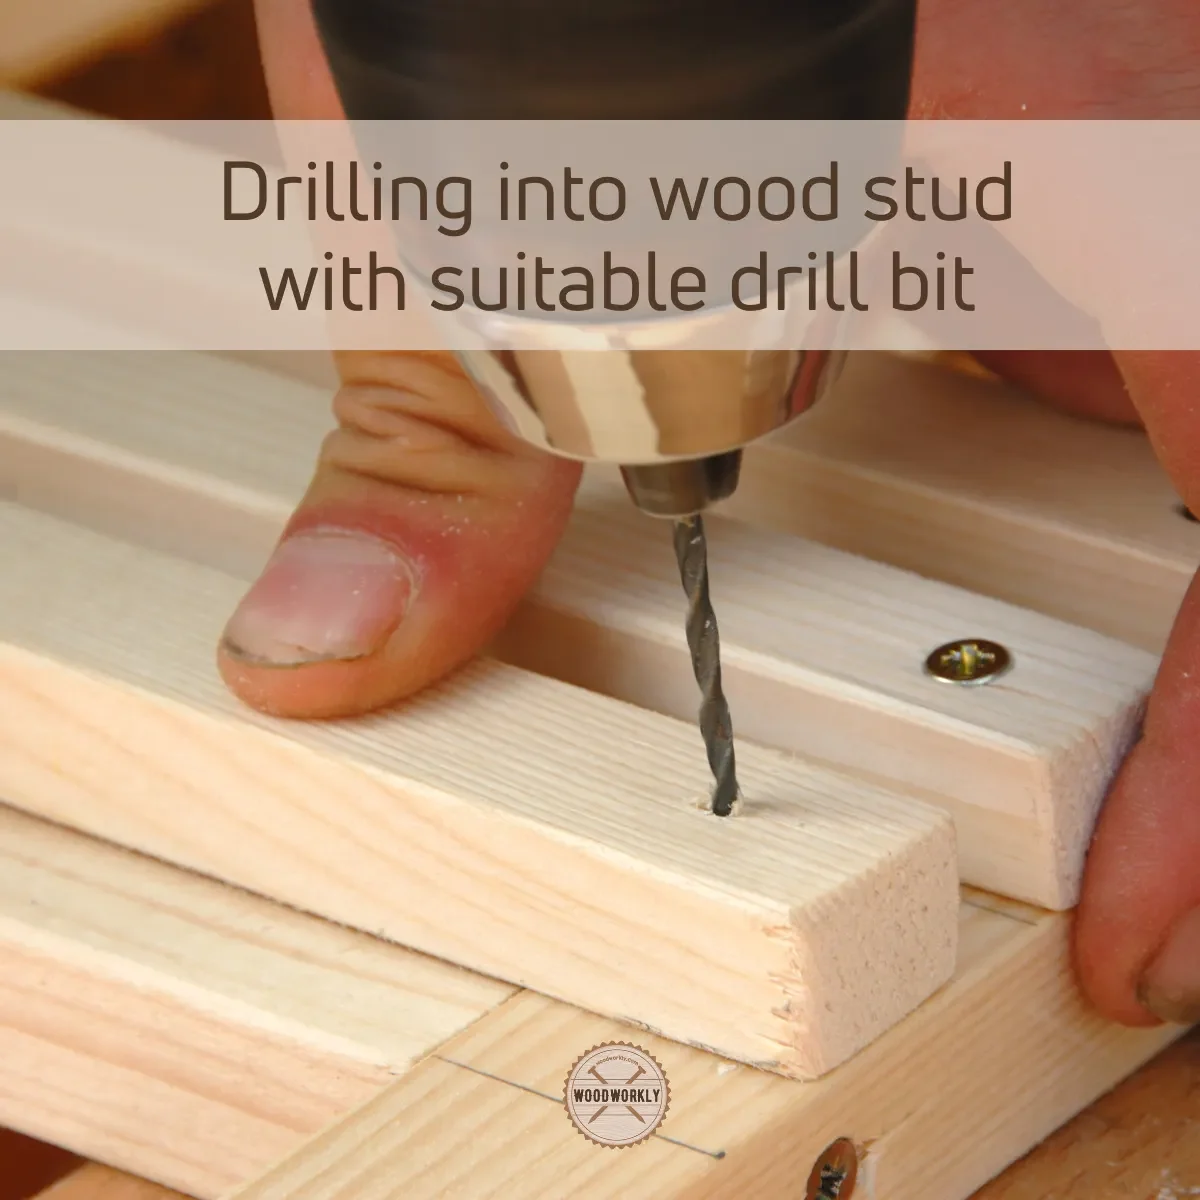 Drilling into wood stud with suitable drill bit